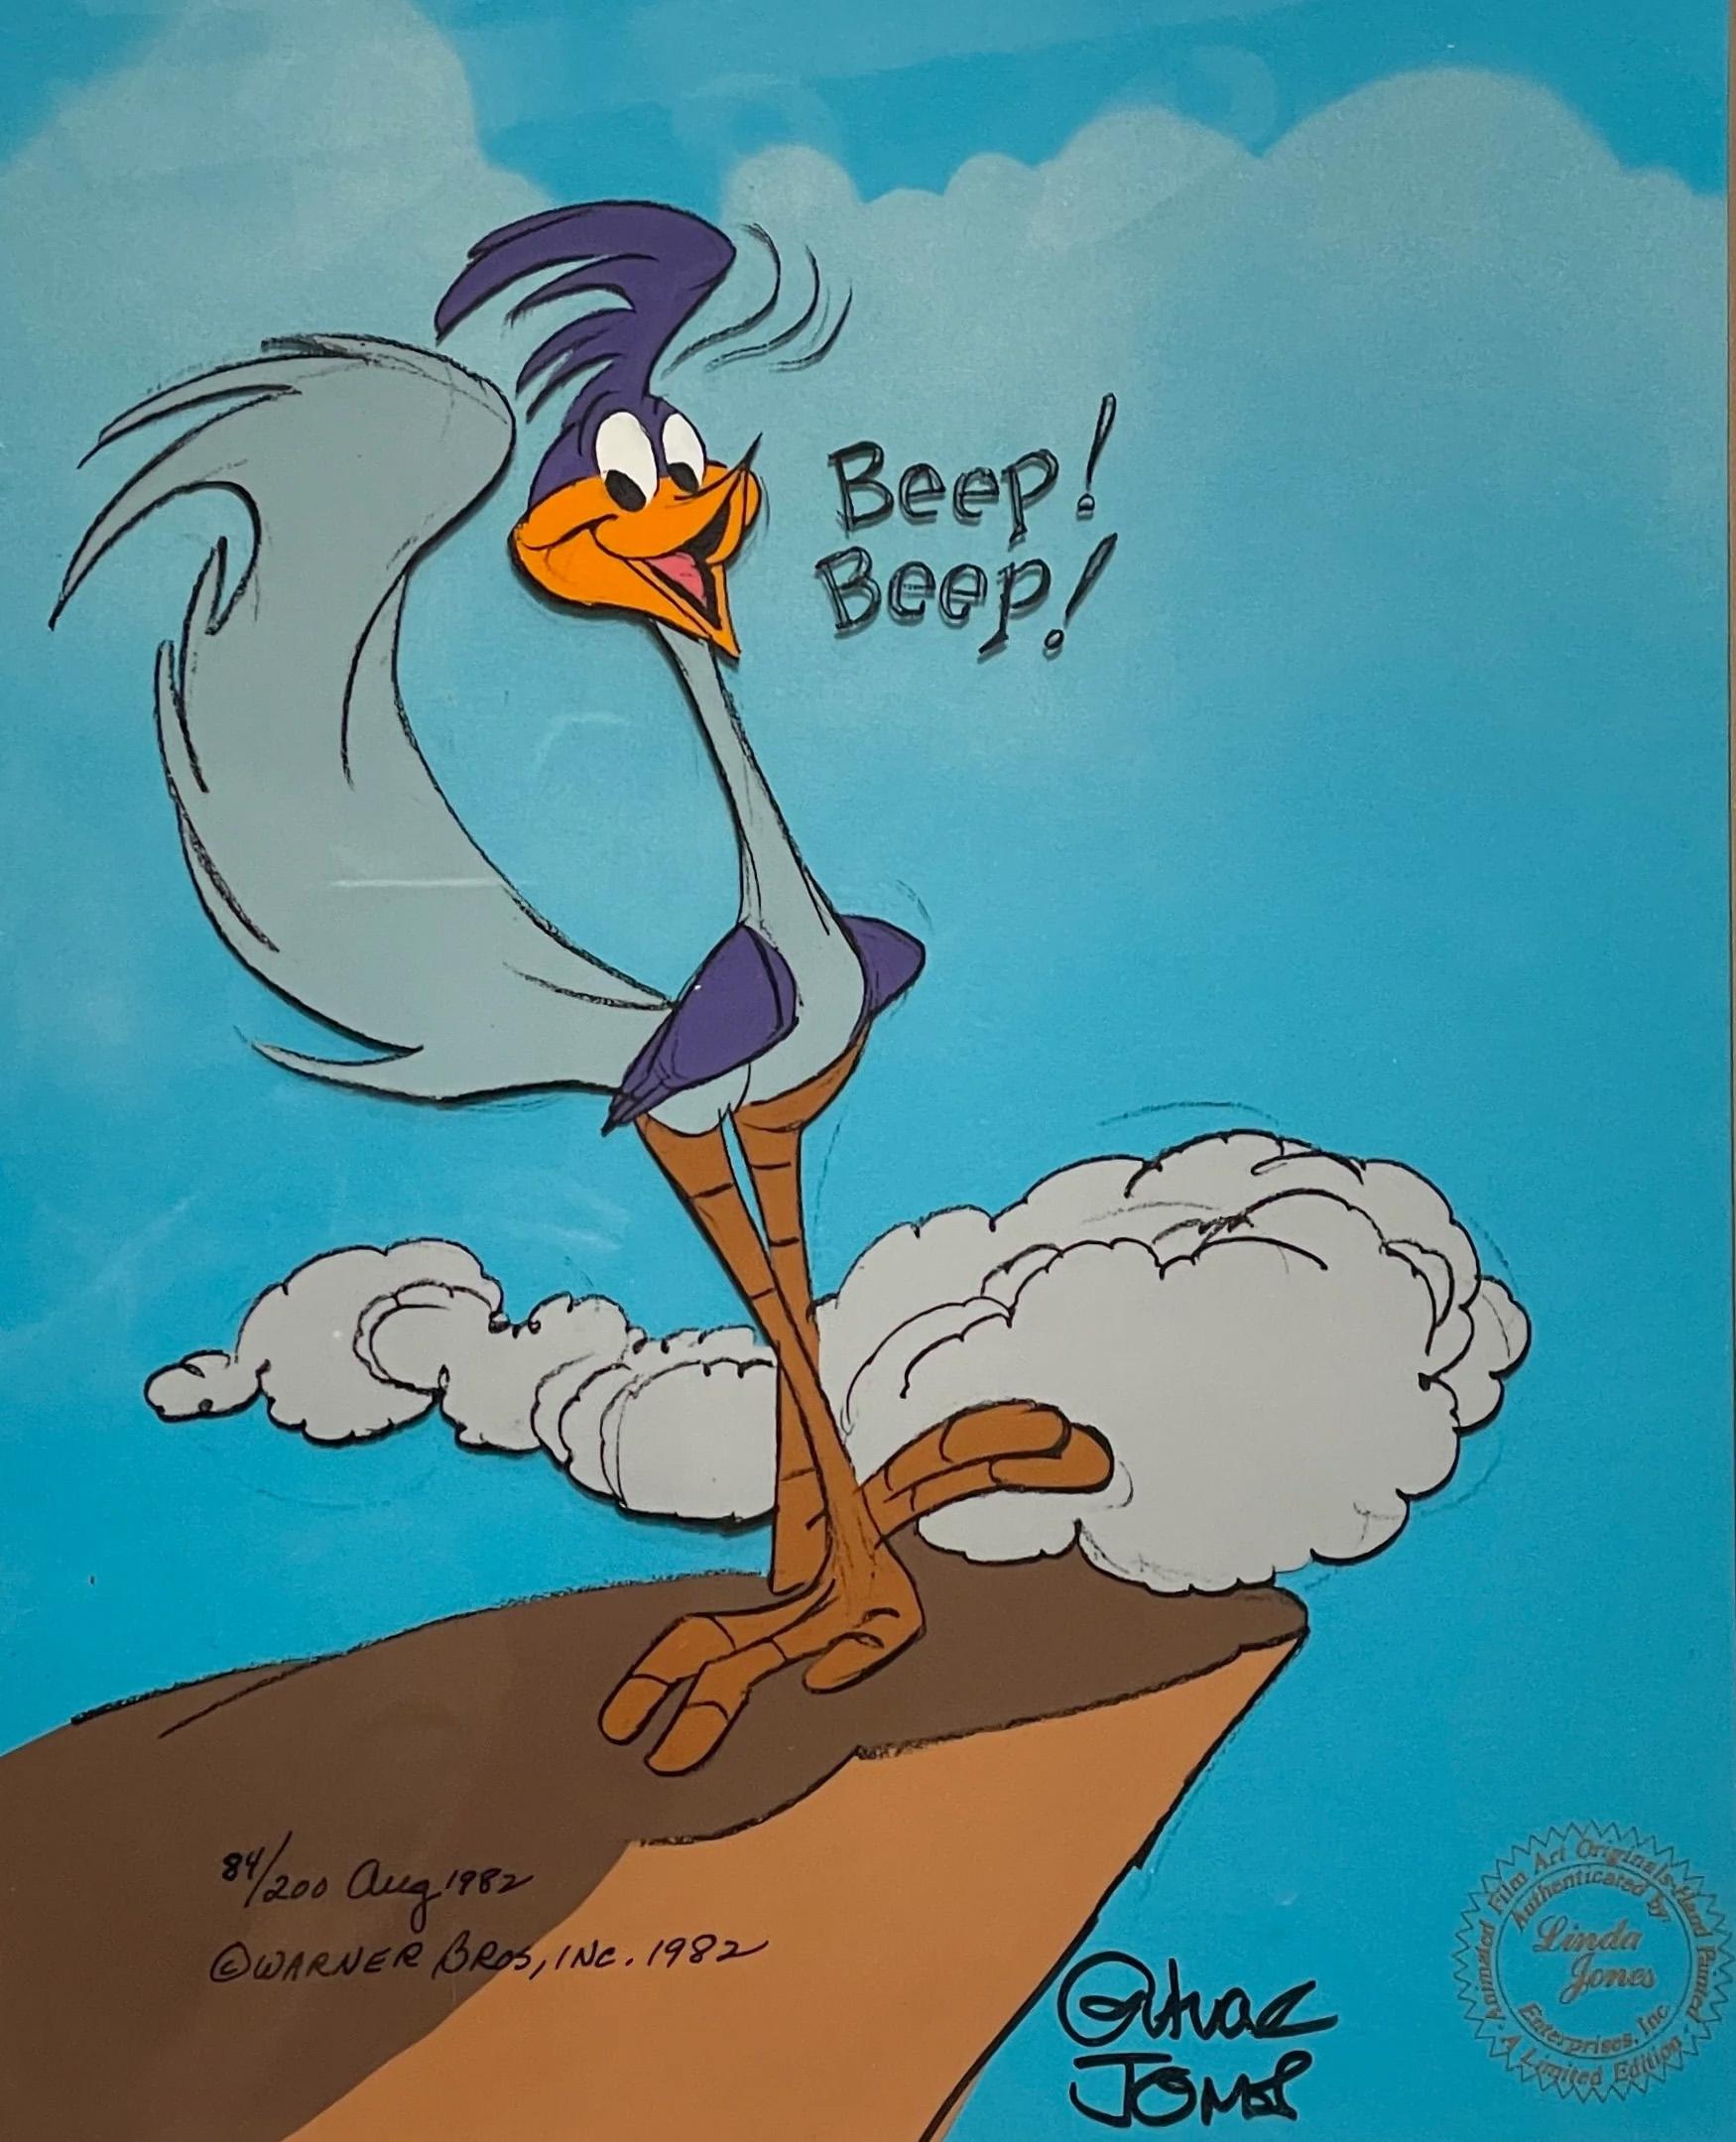 MEDIUM: Limited Edition Cel
IMAGE SIZE: 12 Field
EDITION SIZE: 200
SKU: CCV2724

ABOUT THE IMAGE: This cel is hand-signed by Chuck Jones and is numbered 84/200.